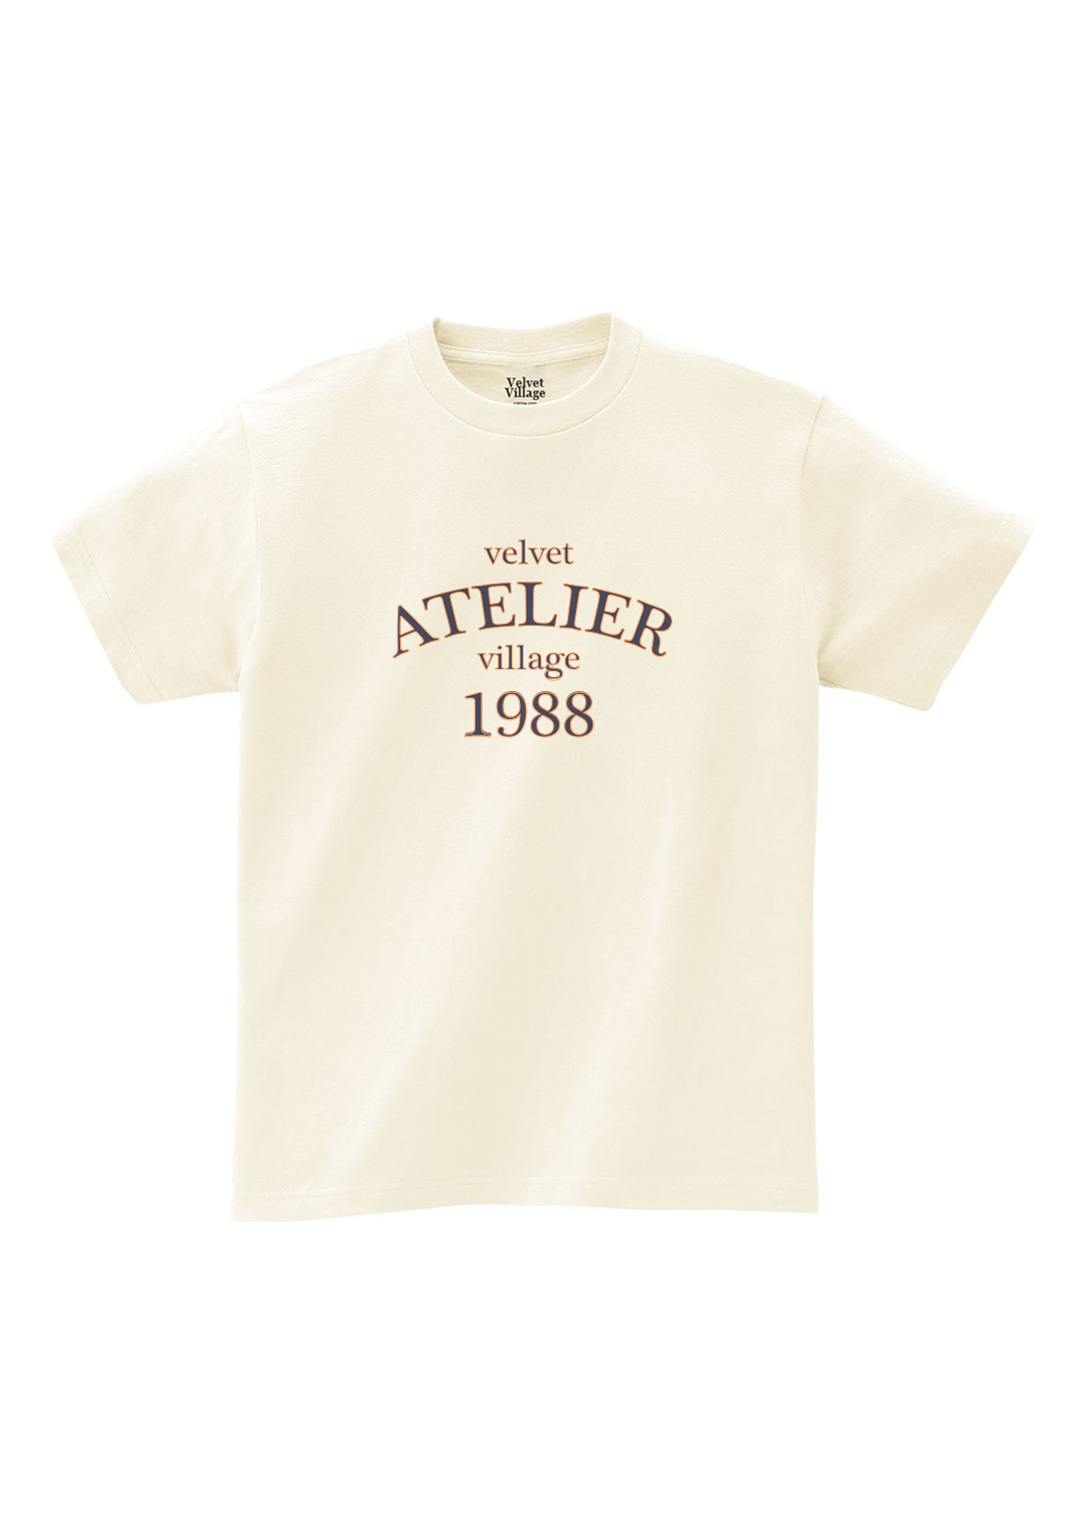 Aterier T-shirt (Ivory)